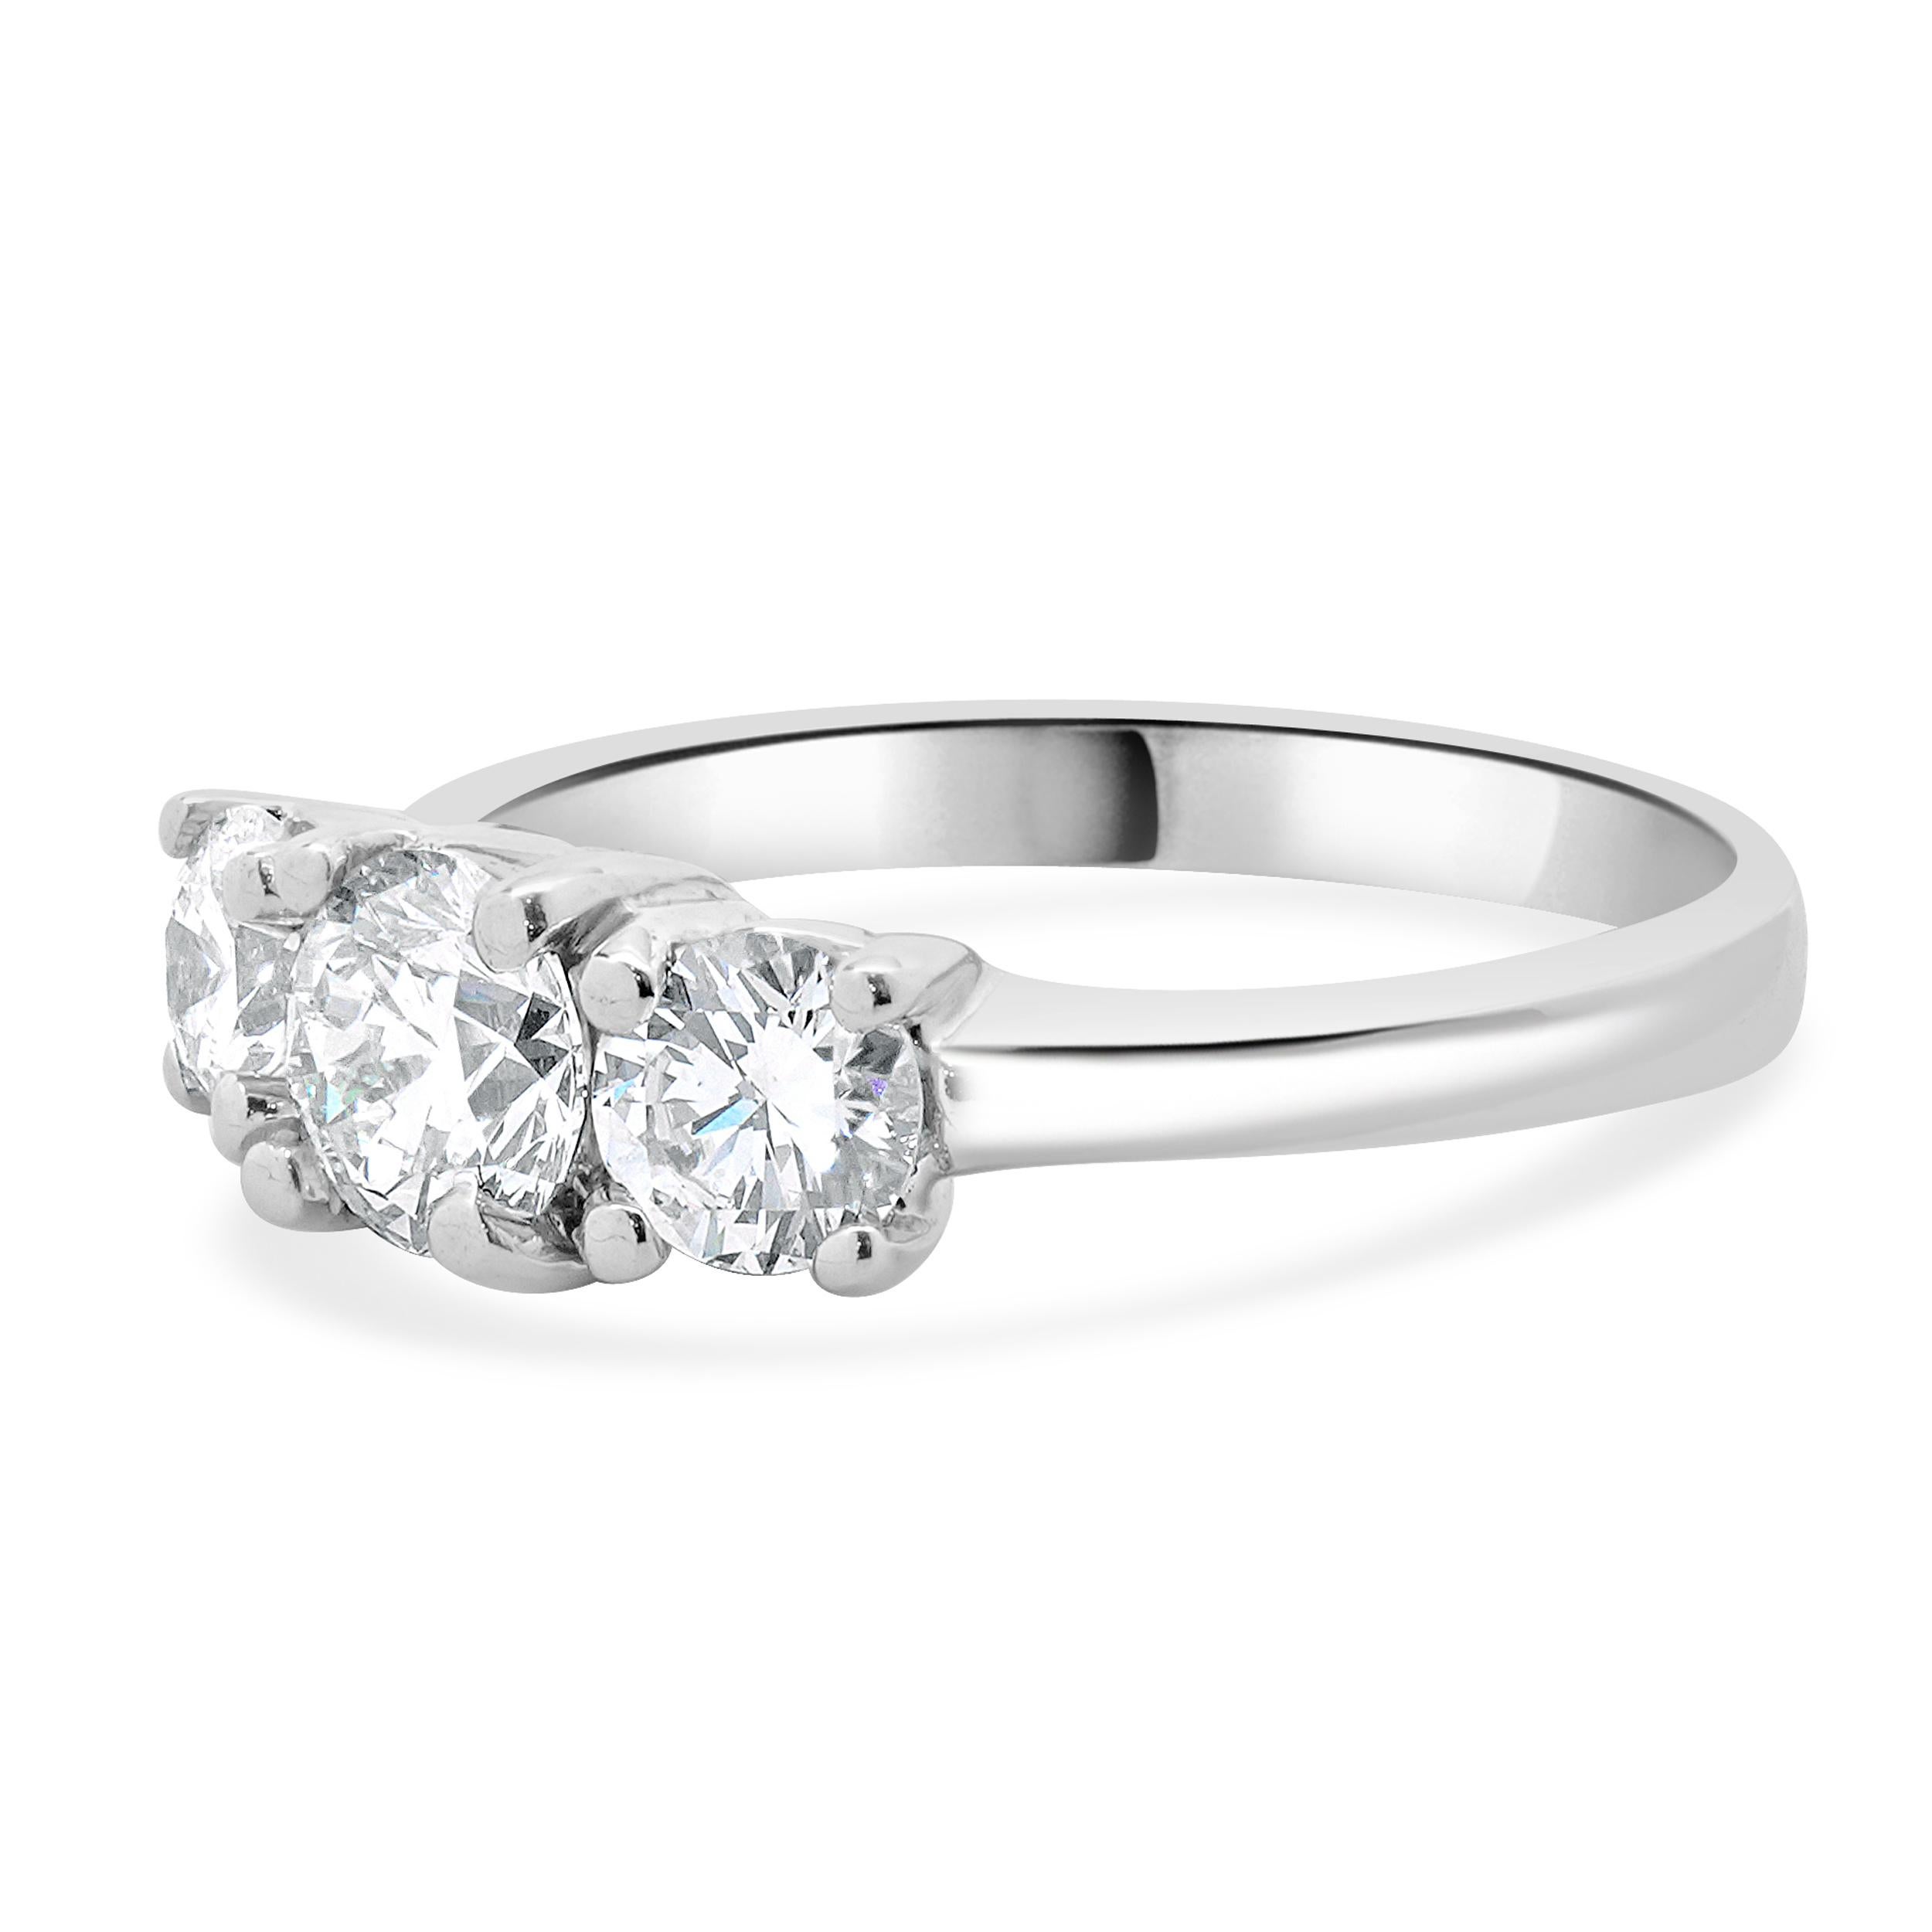 Designer: custom
Material: 14K white gold
Diamond: 1 round brilliant cut = 0.70ct
Color: I
Clarity: VS1
Diamond: 2 round brilliant cut = 0.75cttw
Color: H
Clarity: VS1-2
Dimensions: ring top measures 6mm wide
Ring Size: 8 (complimentary sizing